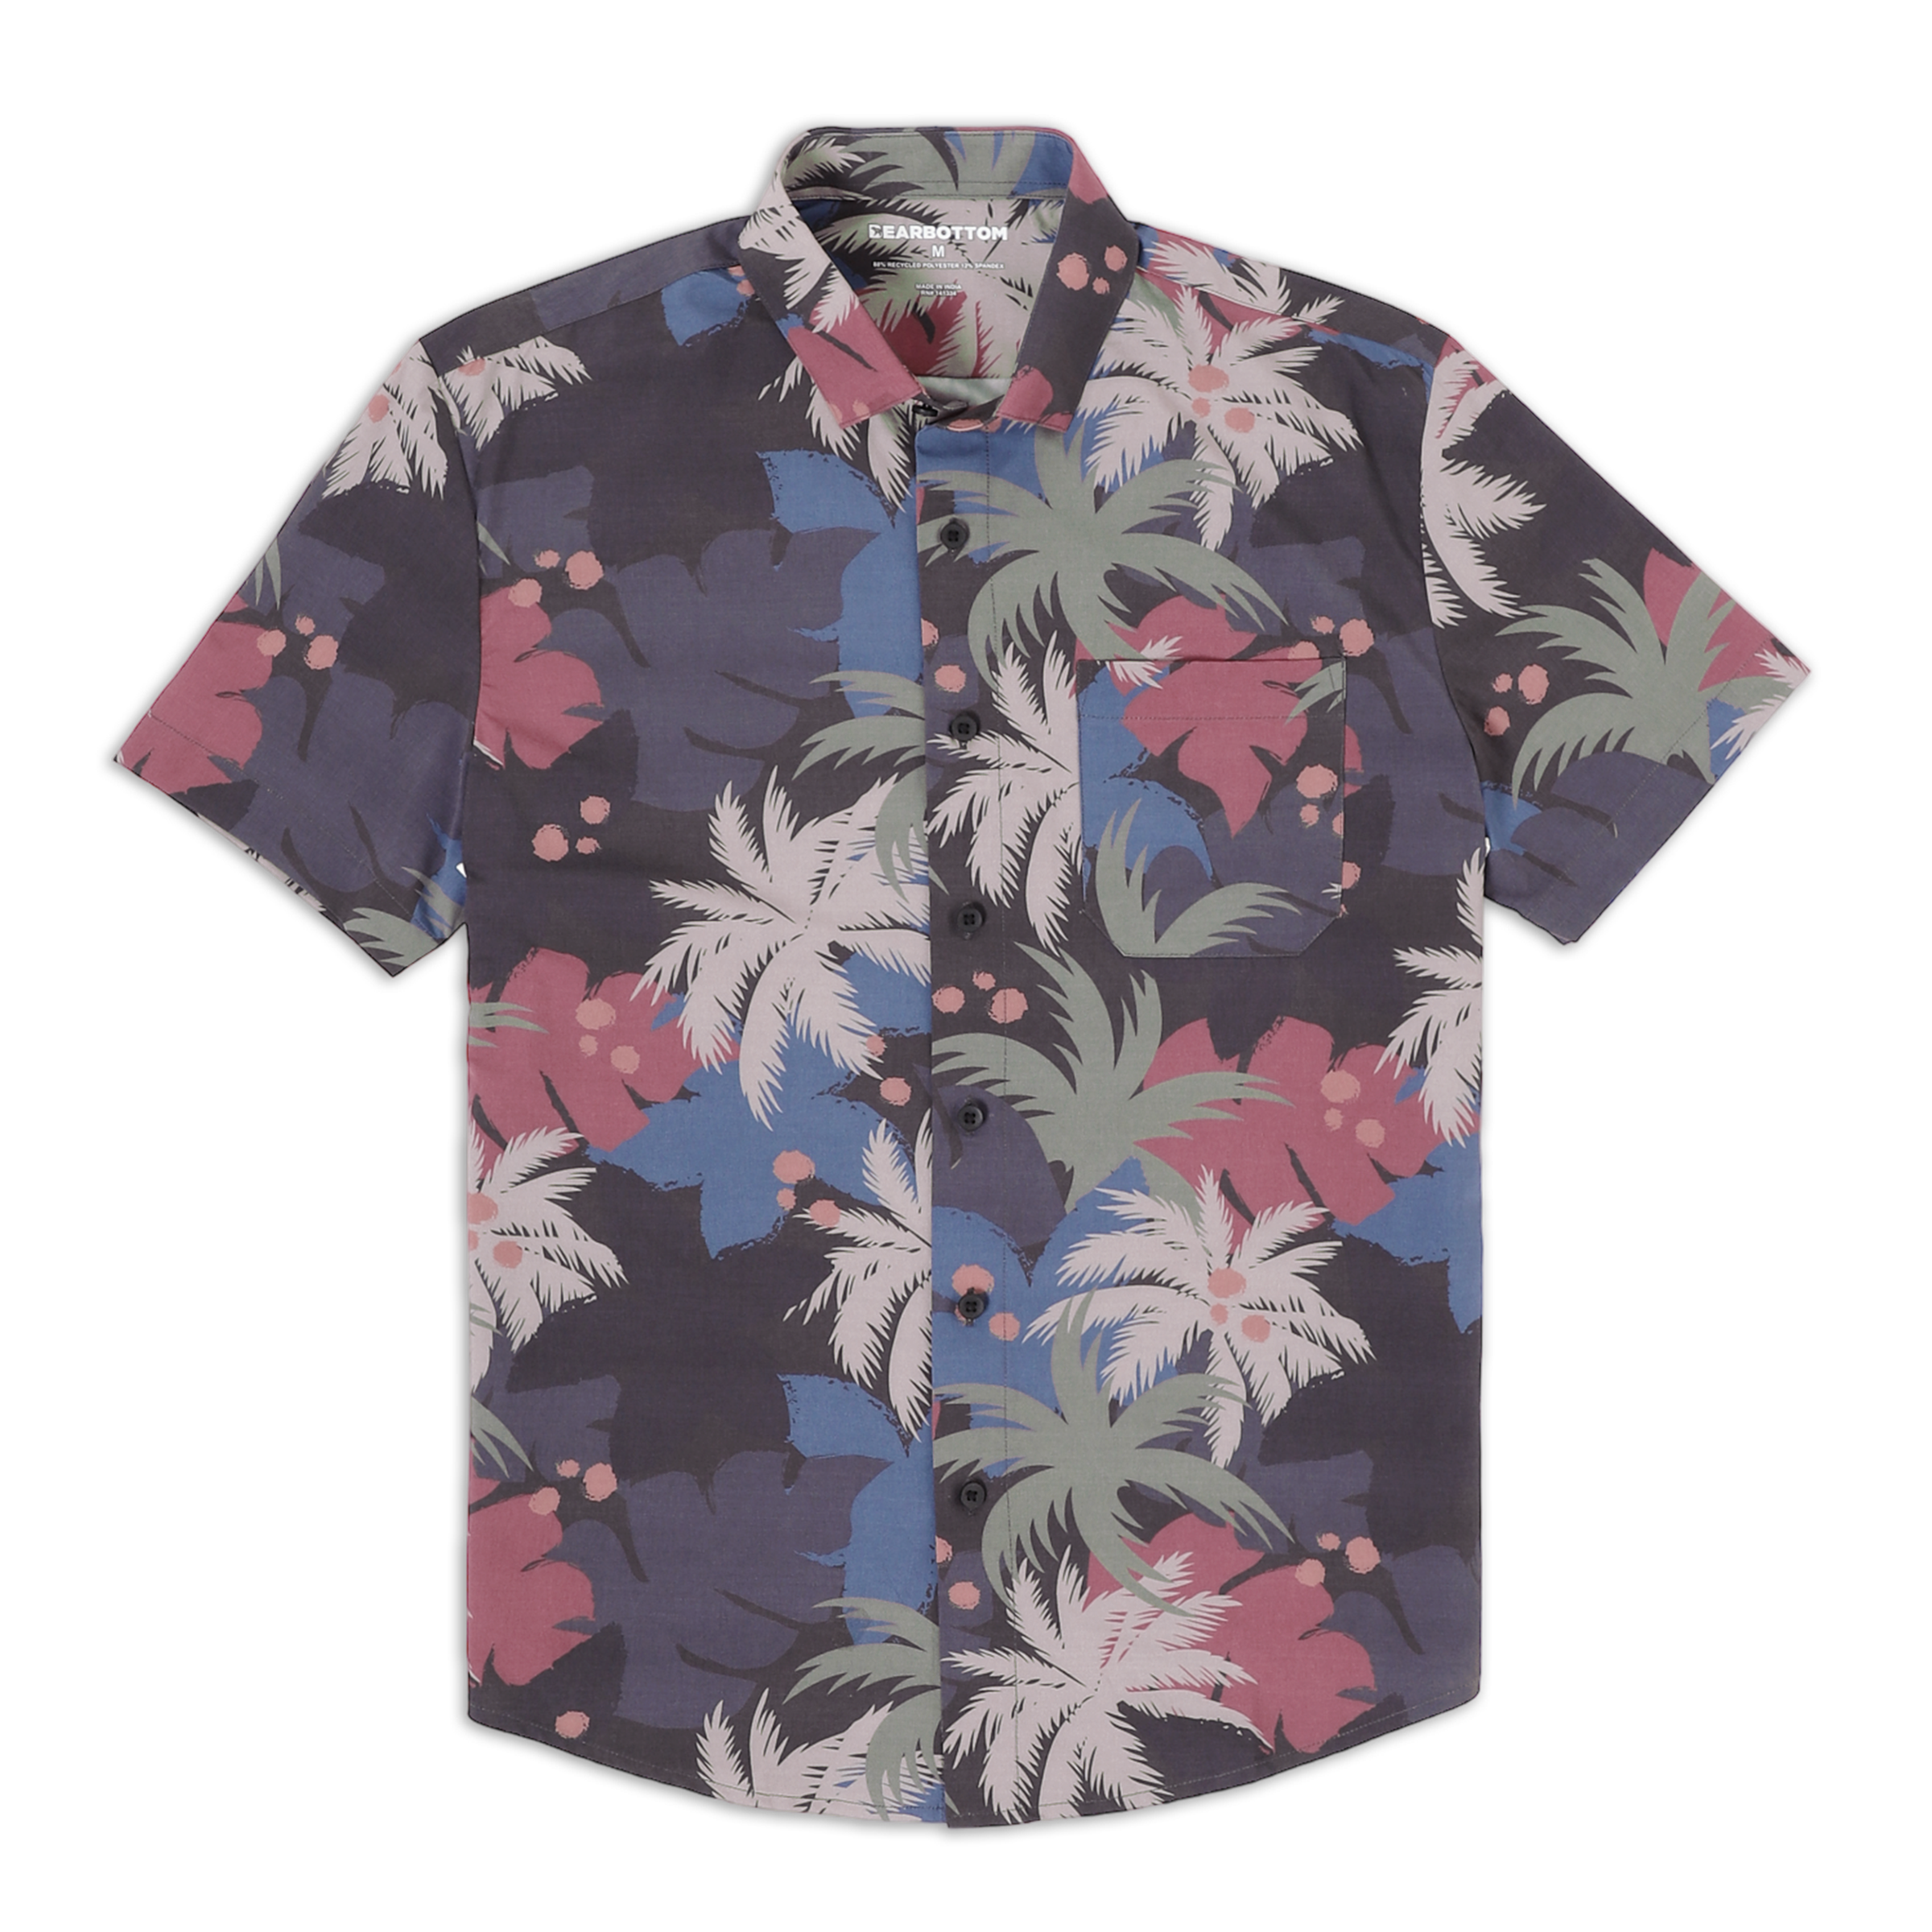 Cabana Shirt Coco front with grey, blue, pink, and off white solid colored palm fronds print on a short sleeve button down collared shirt with a front left patch pocket